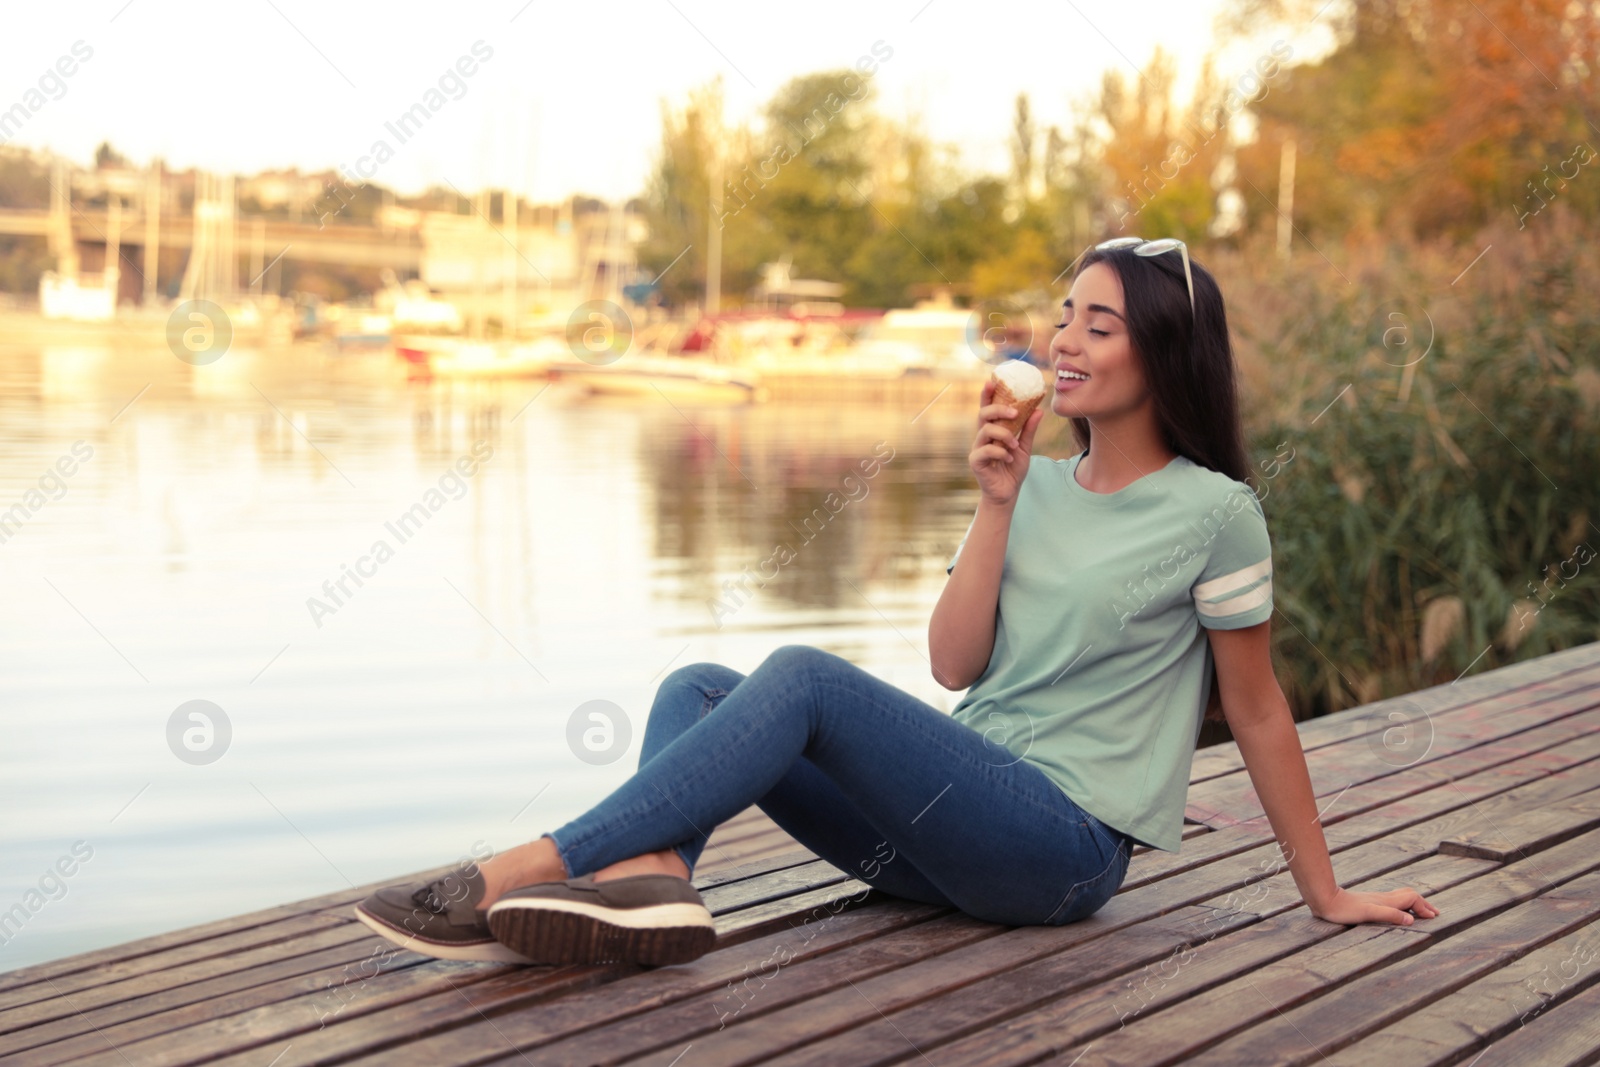 Photo of Happy young woman with delicious ice cream in waffle cone outdoors. Space for text